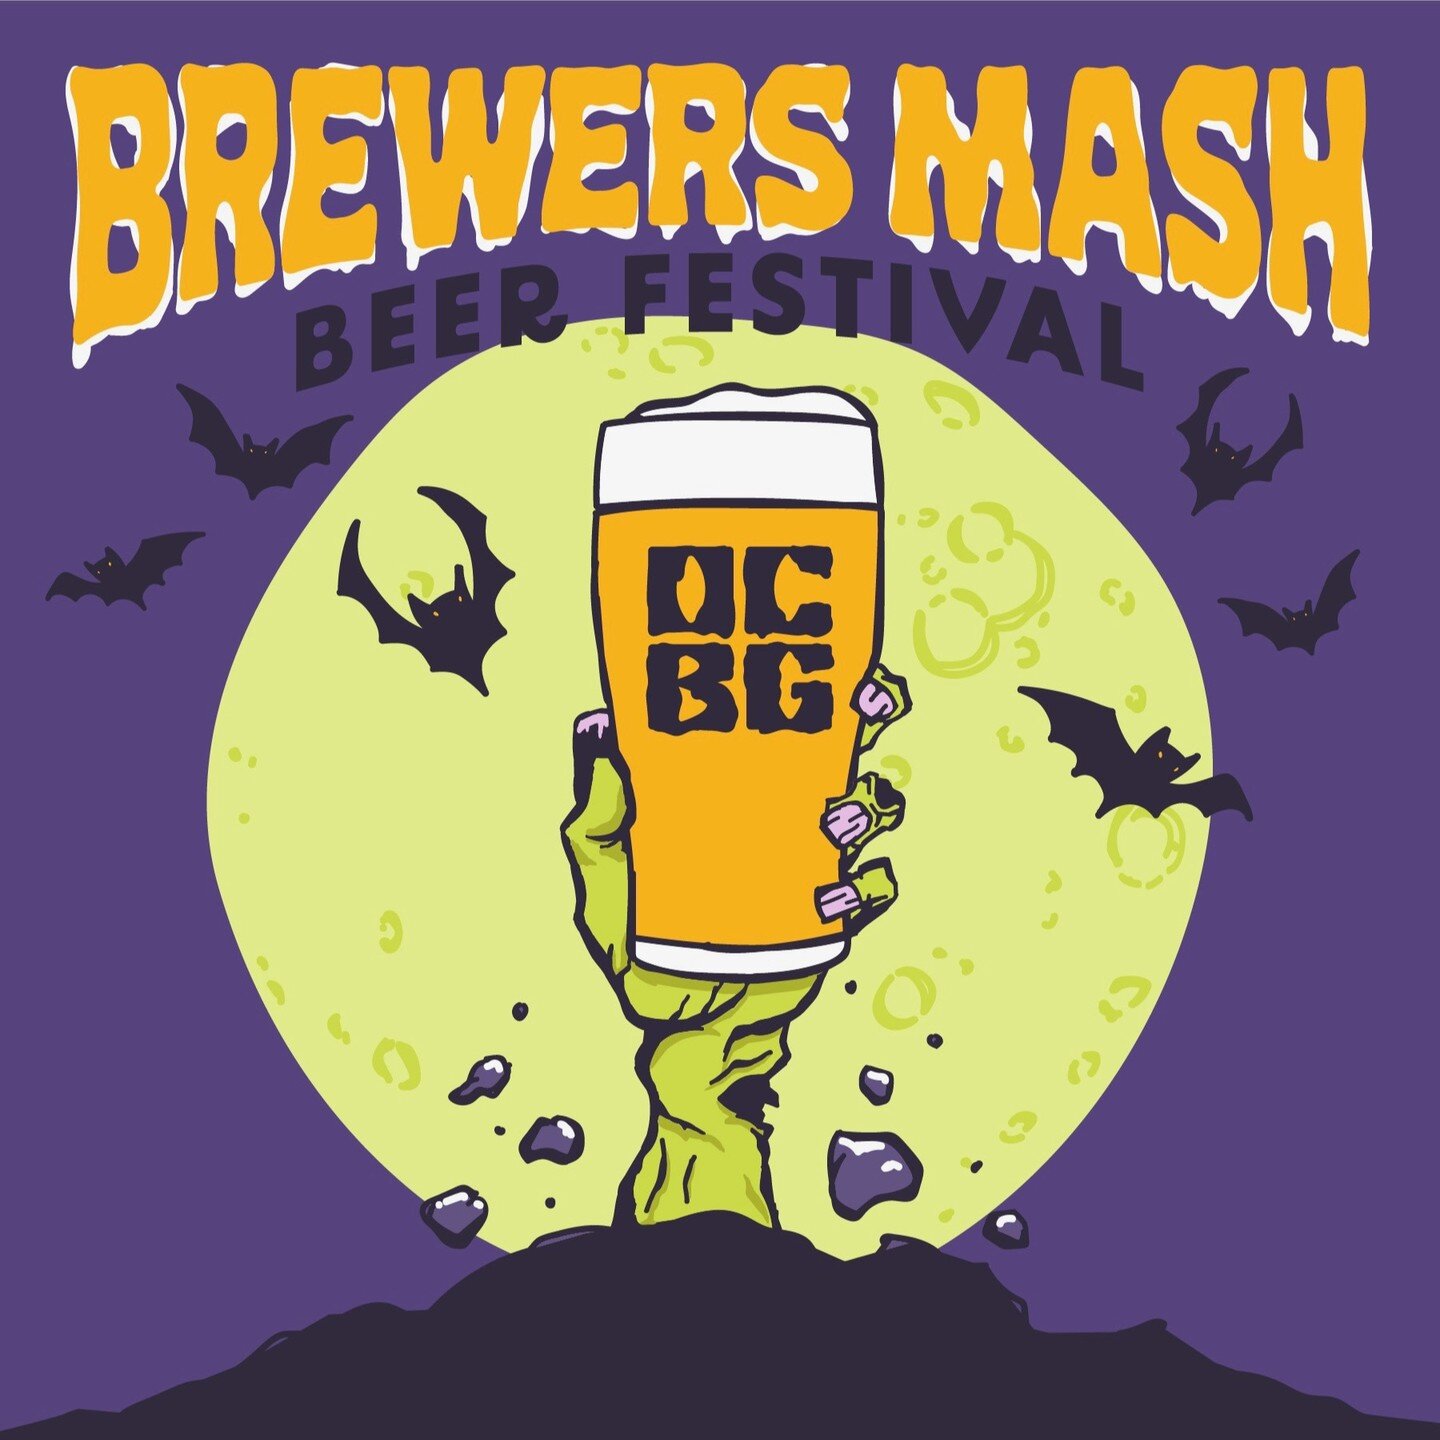 🍻🎃 Get ready to brew up some spooky fun at Brewers Mash 2023! THIS SATURDAY 10/28! 🎉 Unlimited craft beer tastings, epic food vendors, live entertainment, and costume contests await. Don't miss out &ndash; secure your tickets now! 🎟️ #BrewersMash